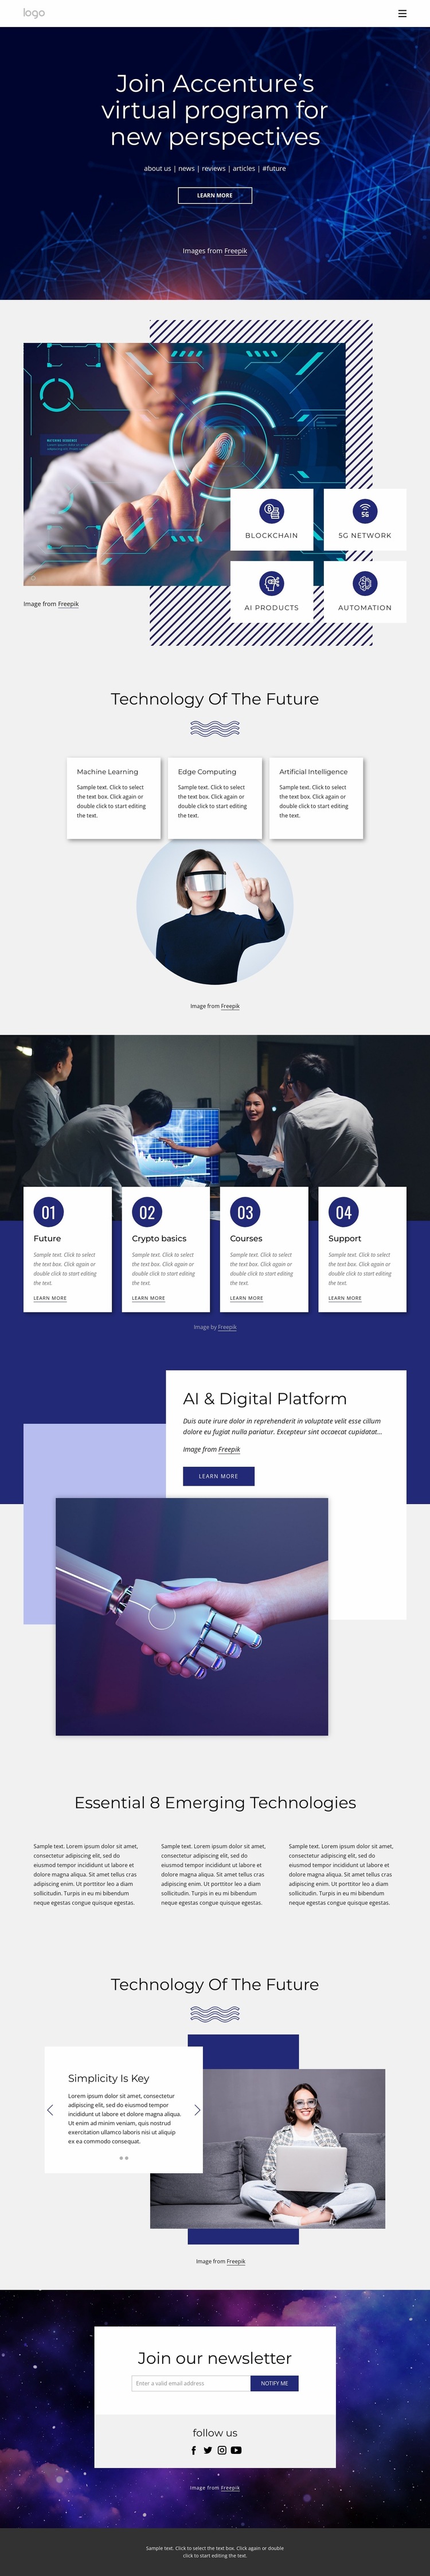 New technology perspectives Website Builder Templates